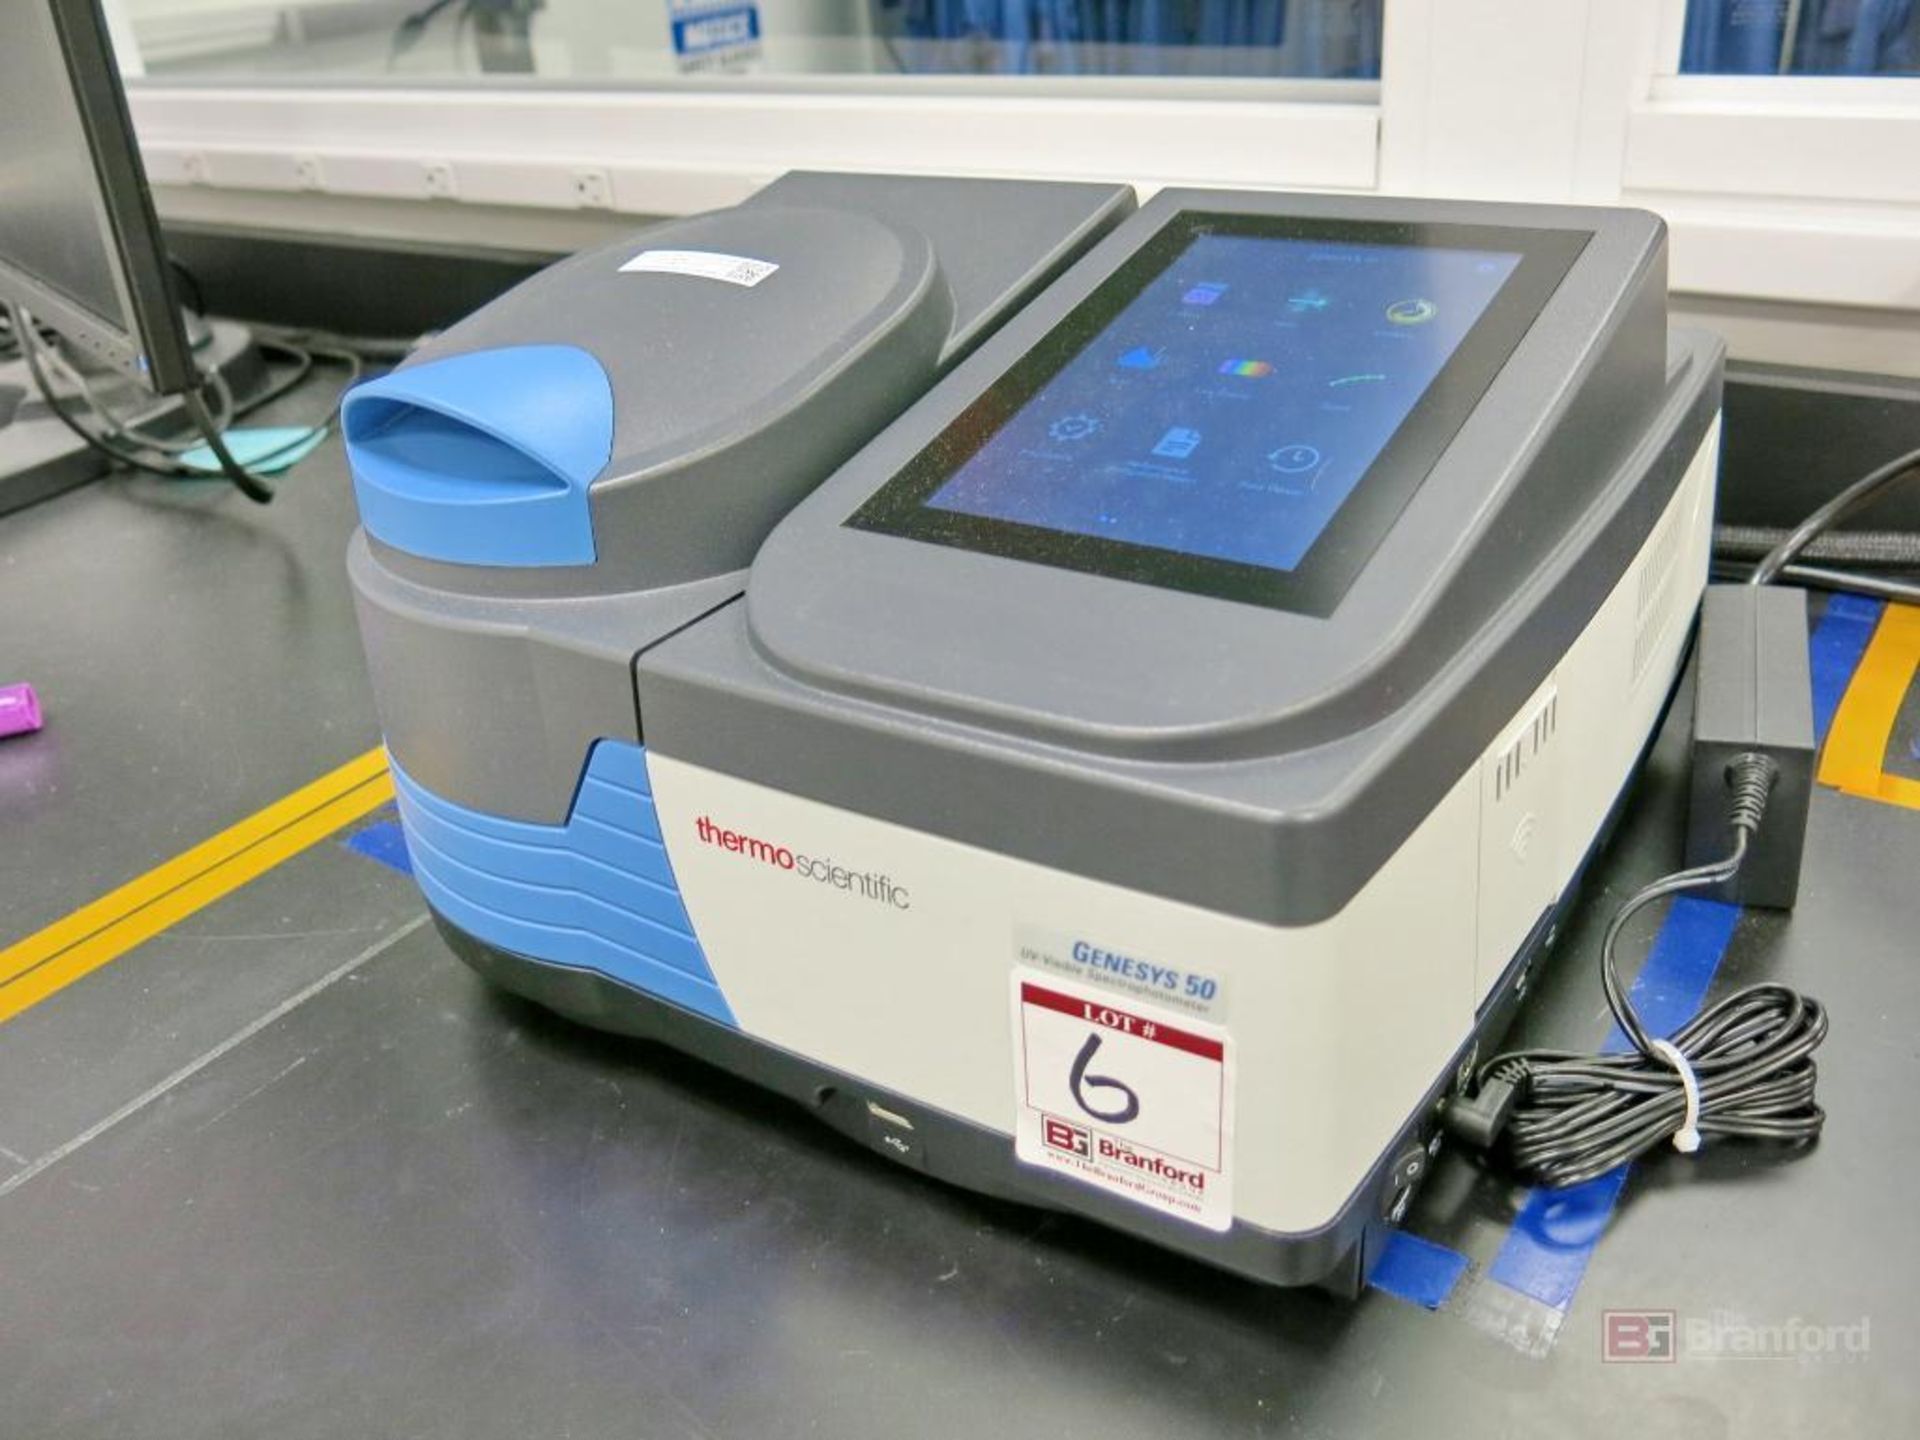 Thermo Scientific Model Genesis 50 UV-Visible Spectrophotometer - Image 3 of 4